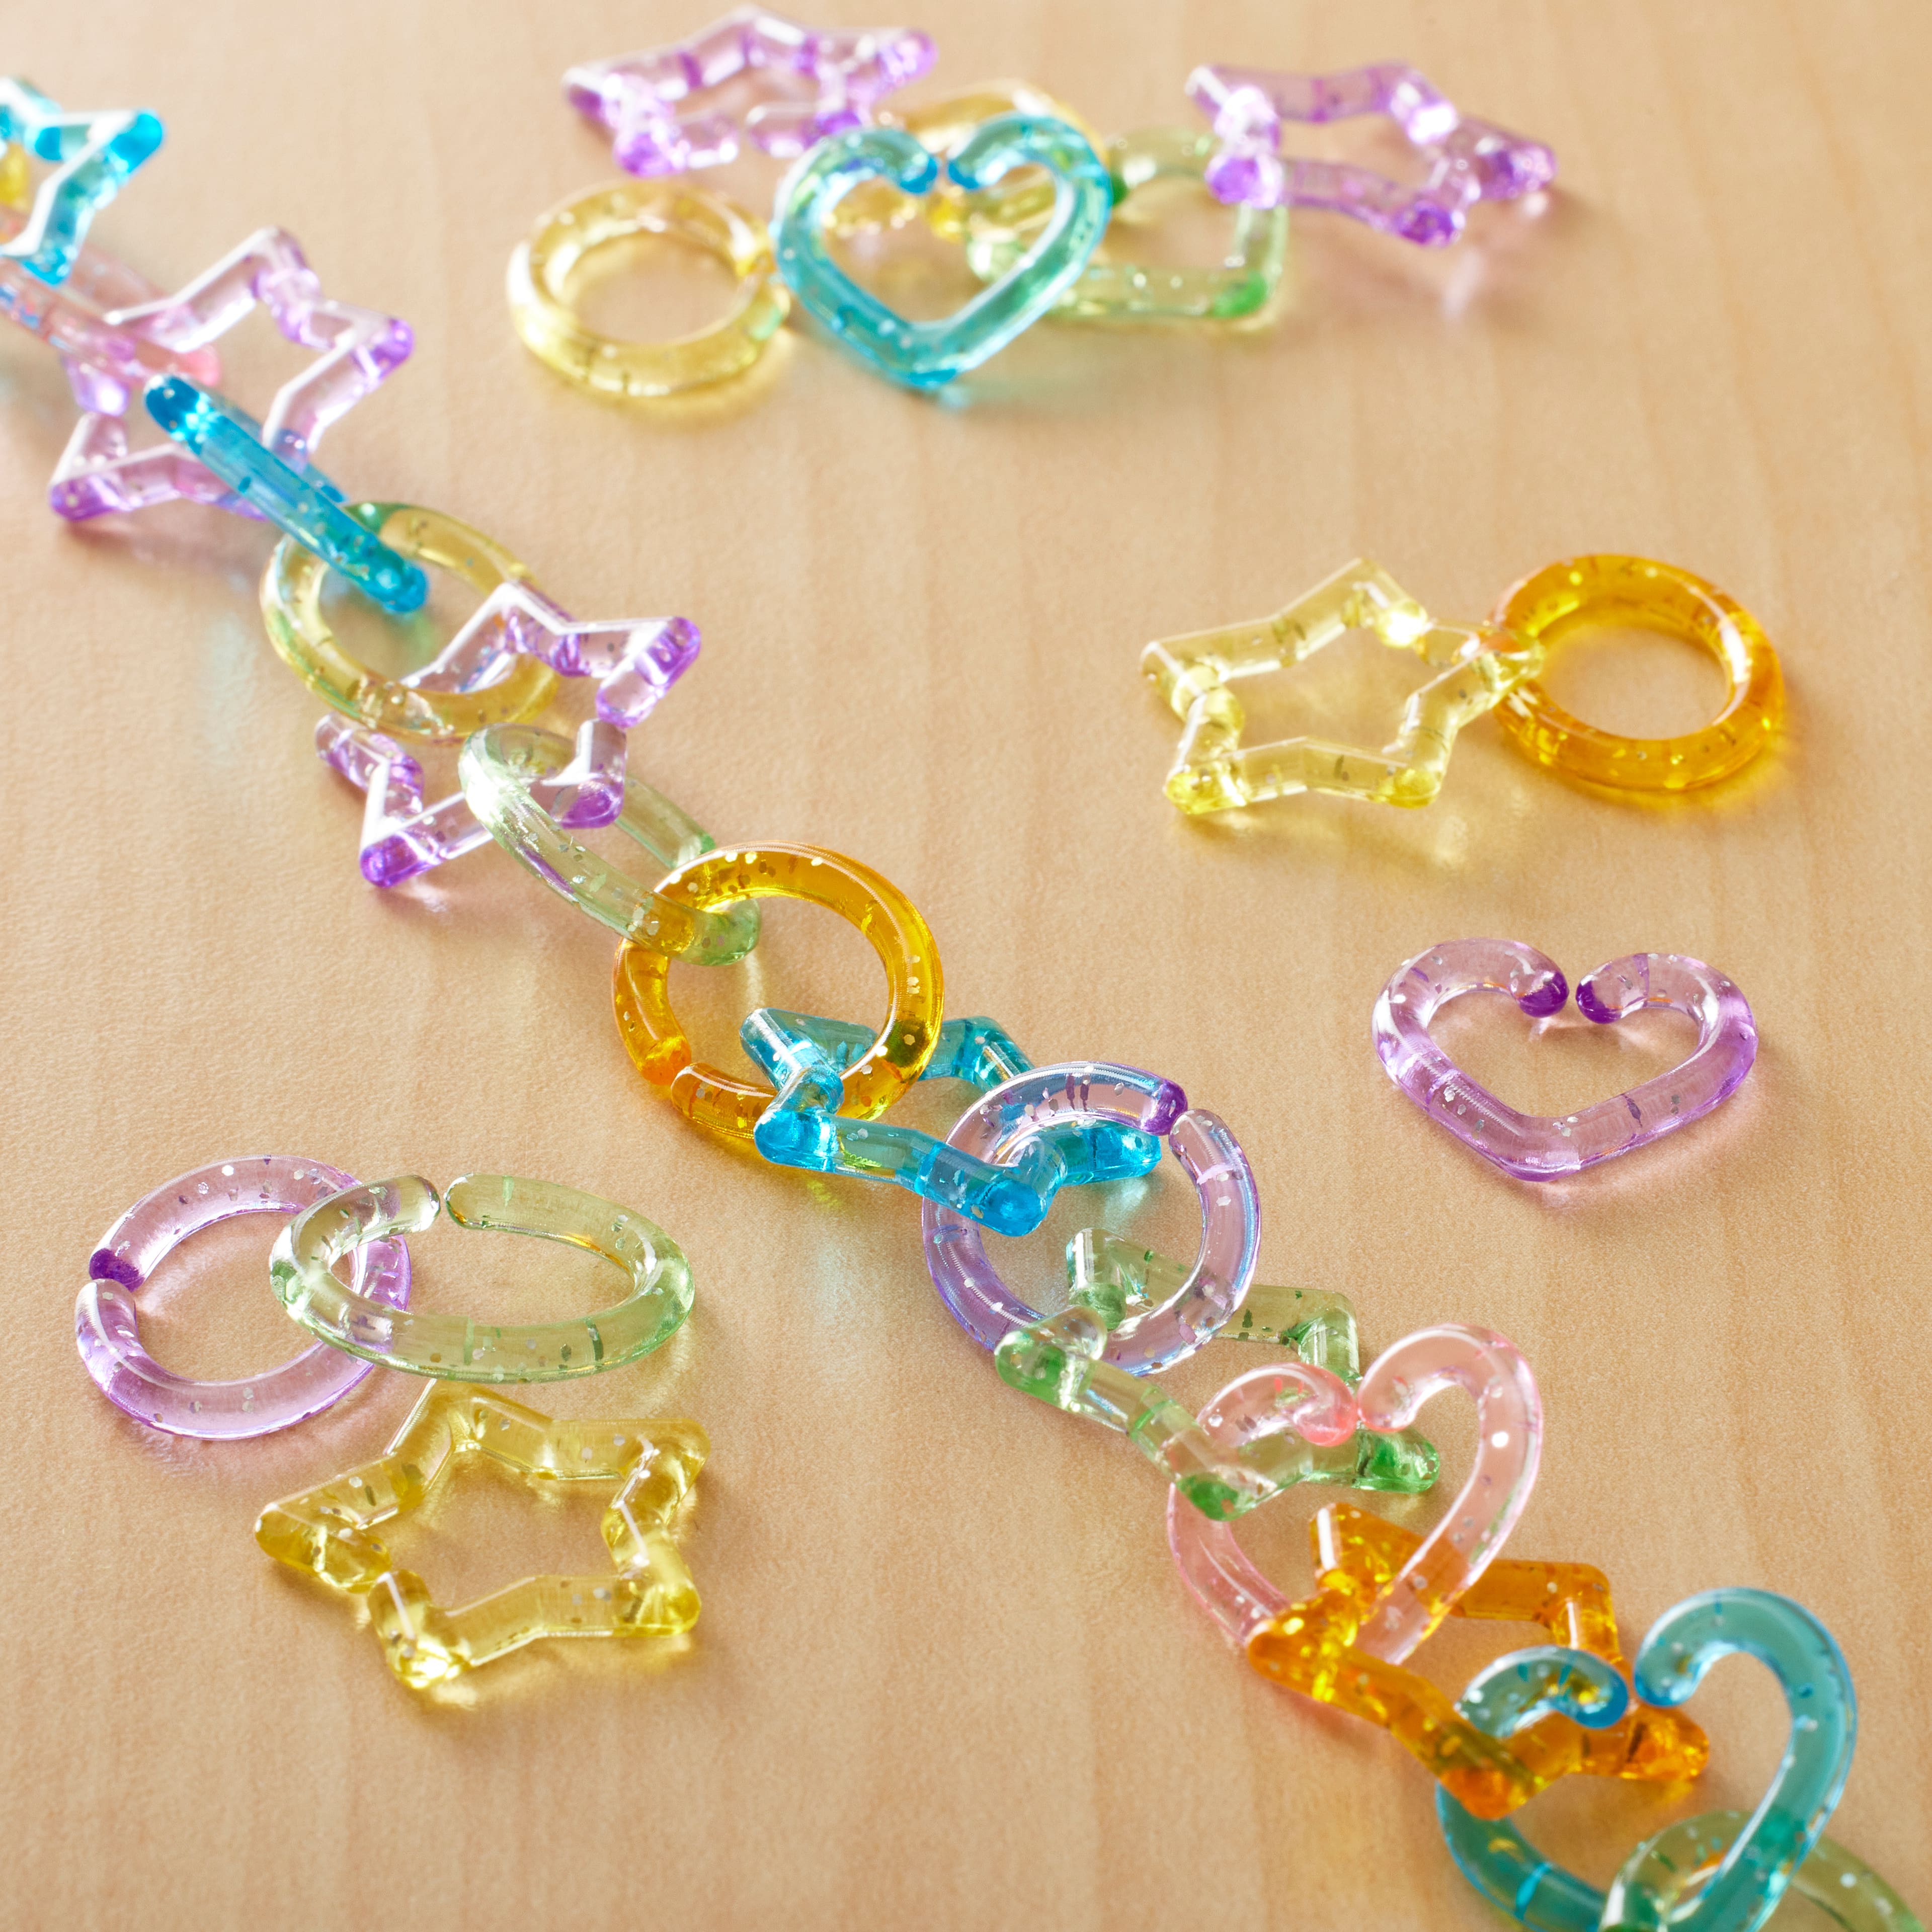 Michaels Bulk 12 Packs: 400 Ct. (4,800 Total) Pastel Plastic Chain Links by Creatology, Girl's, Size: 0.55 x 0.35, Assorted